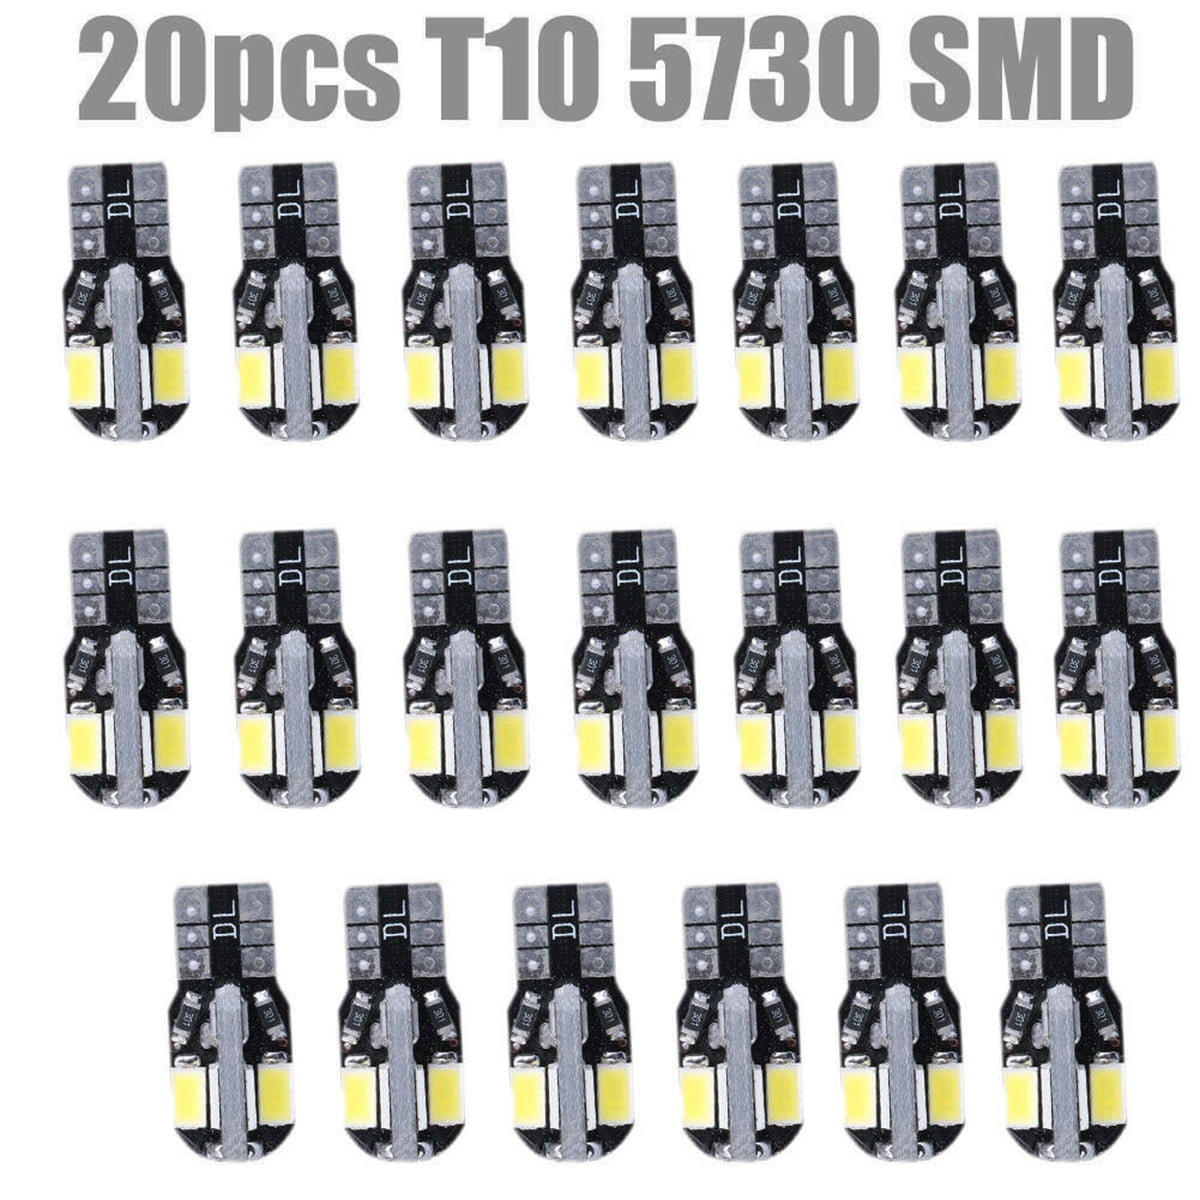 Reading Lights Side Lights GLL 10pcs T10 501 LED Bulbs White W5W T10 LED Bulbs 5630 5SMD for Car Interior Lights Dome Lights Number Plate Lights